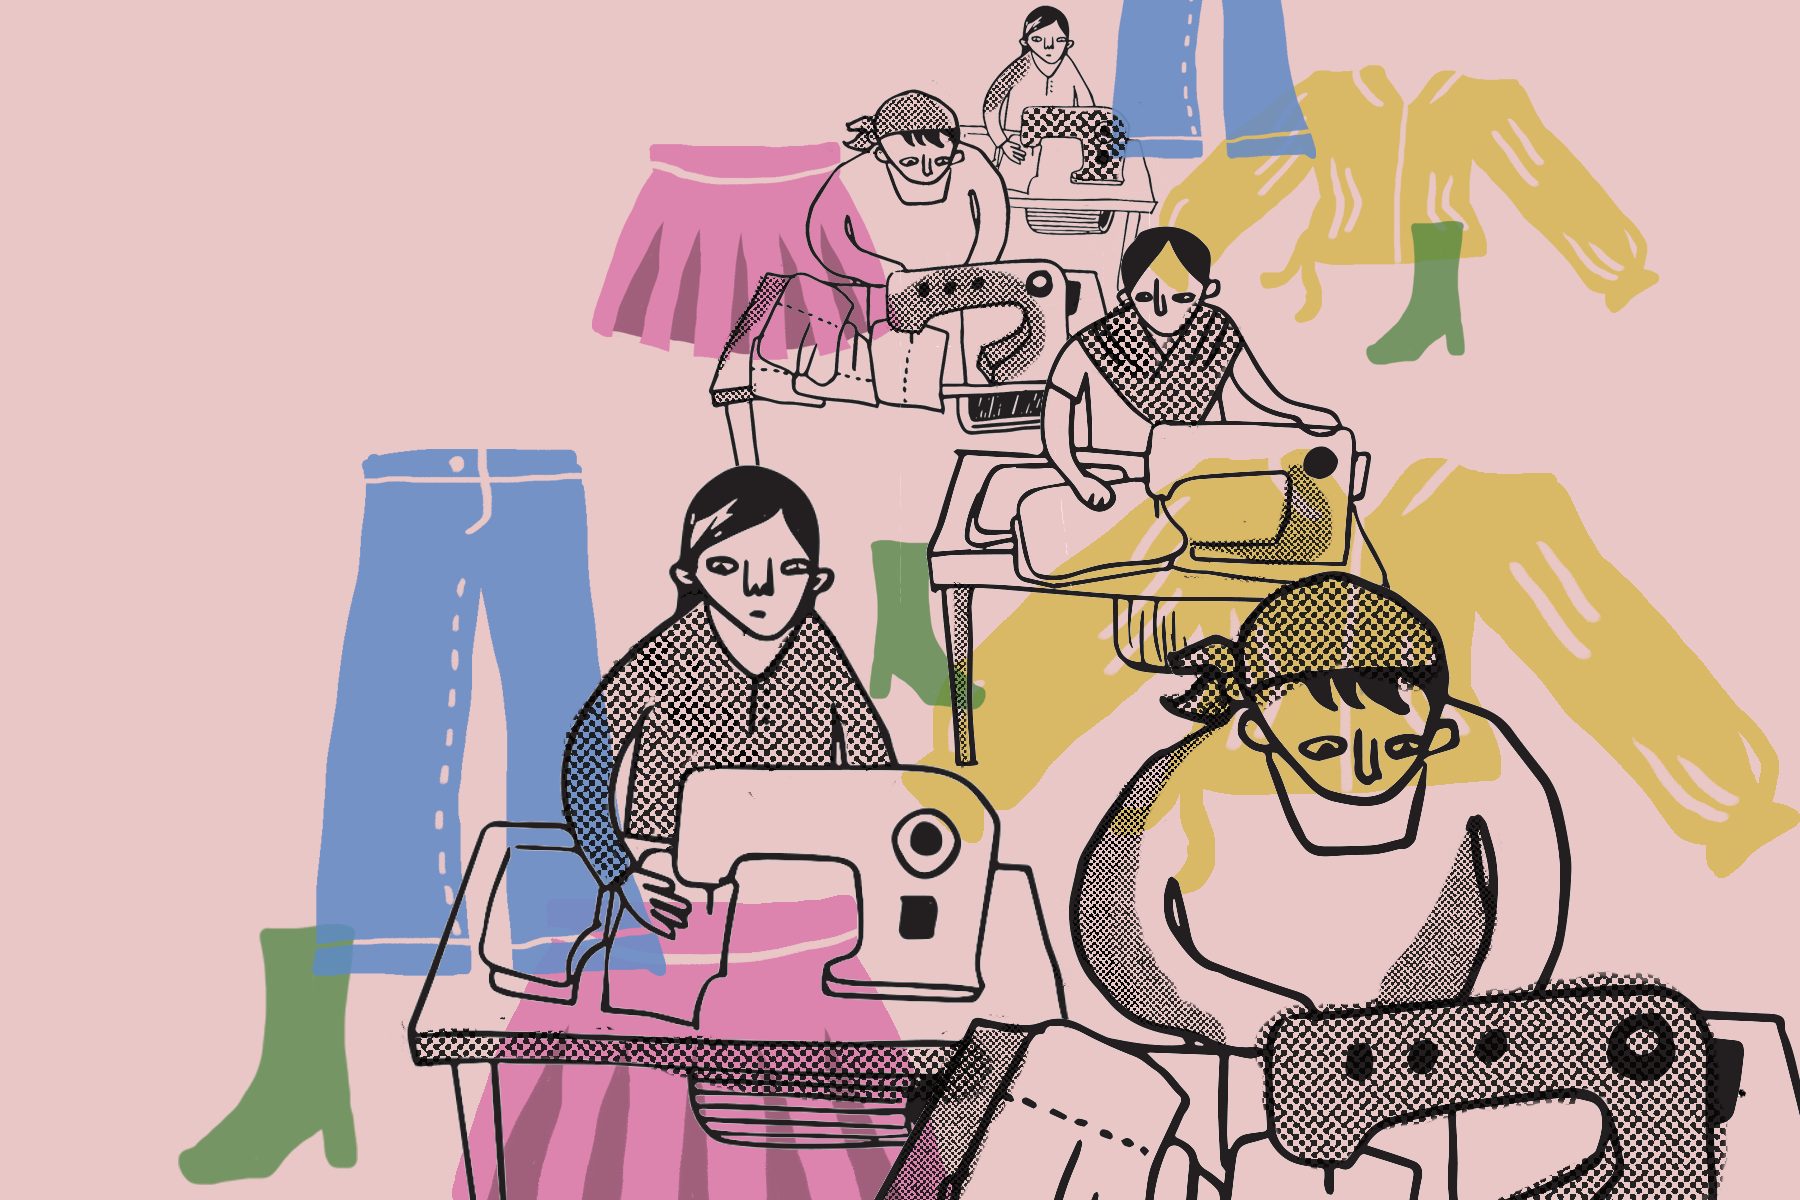 In an article about fast fashion company Shein, an illustration of factory workers sewing clothes